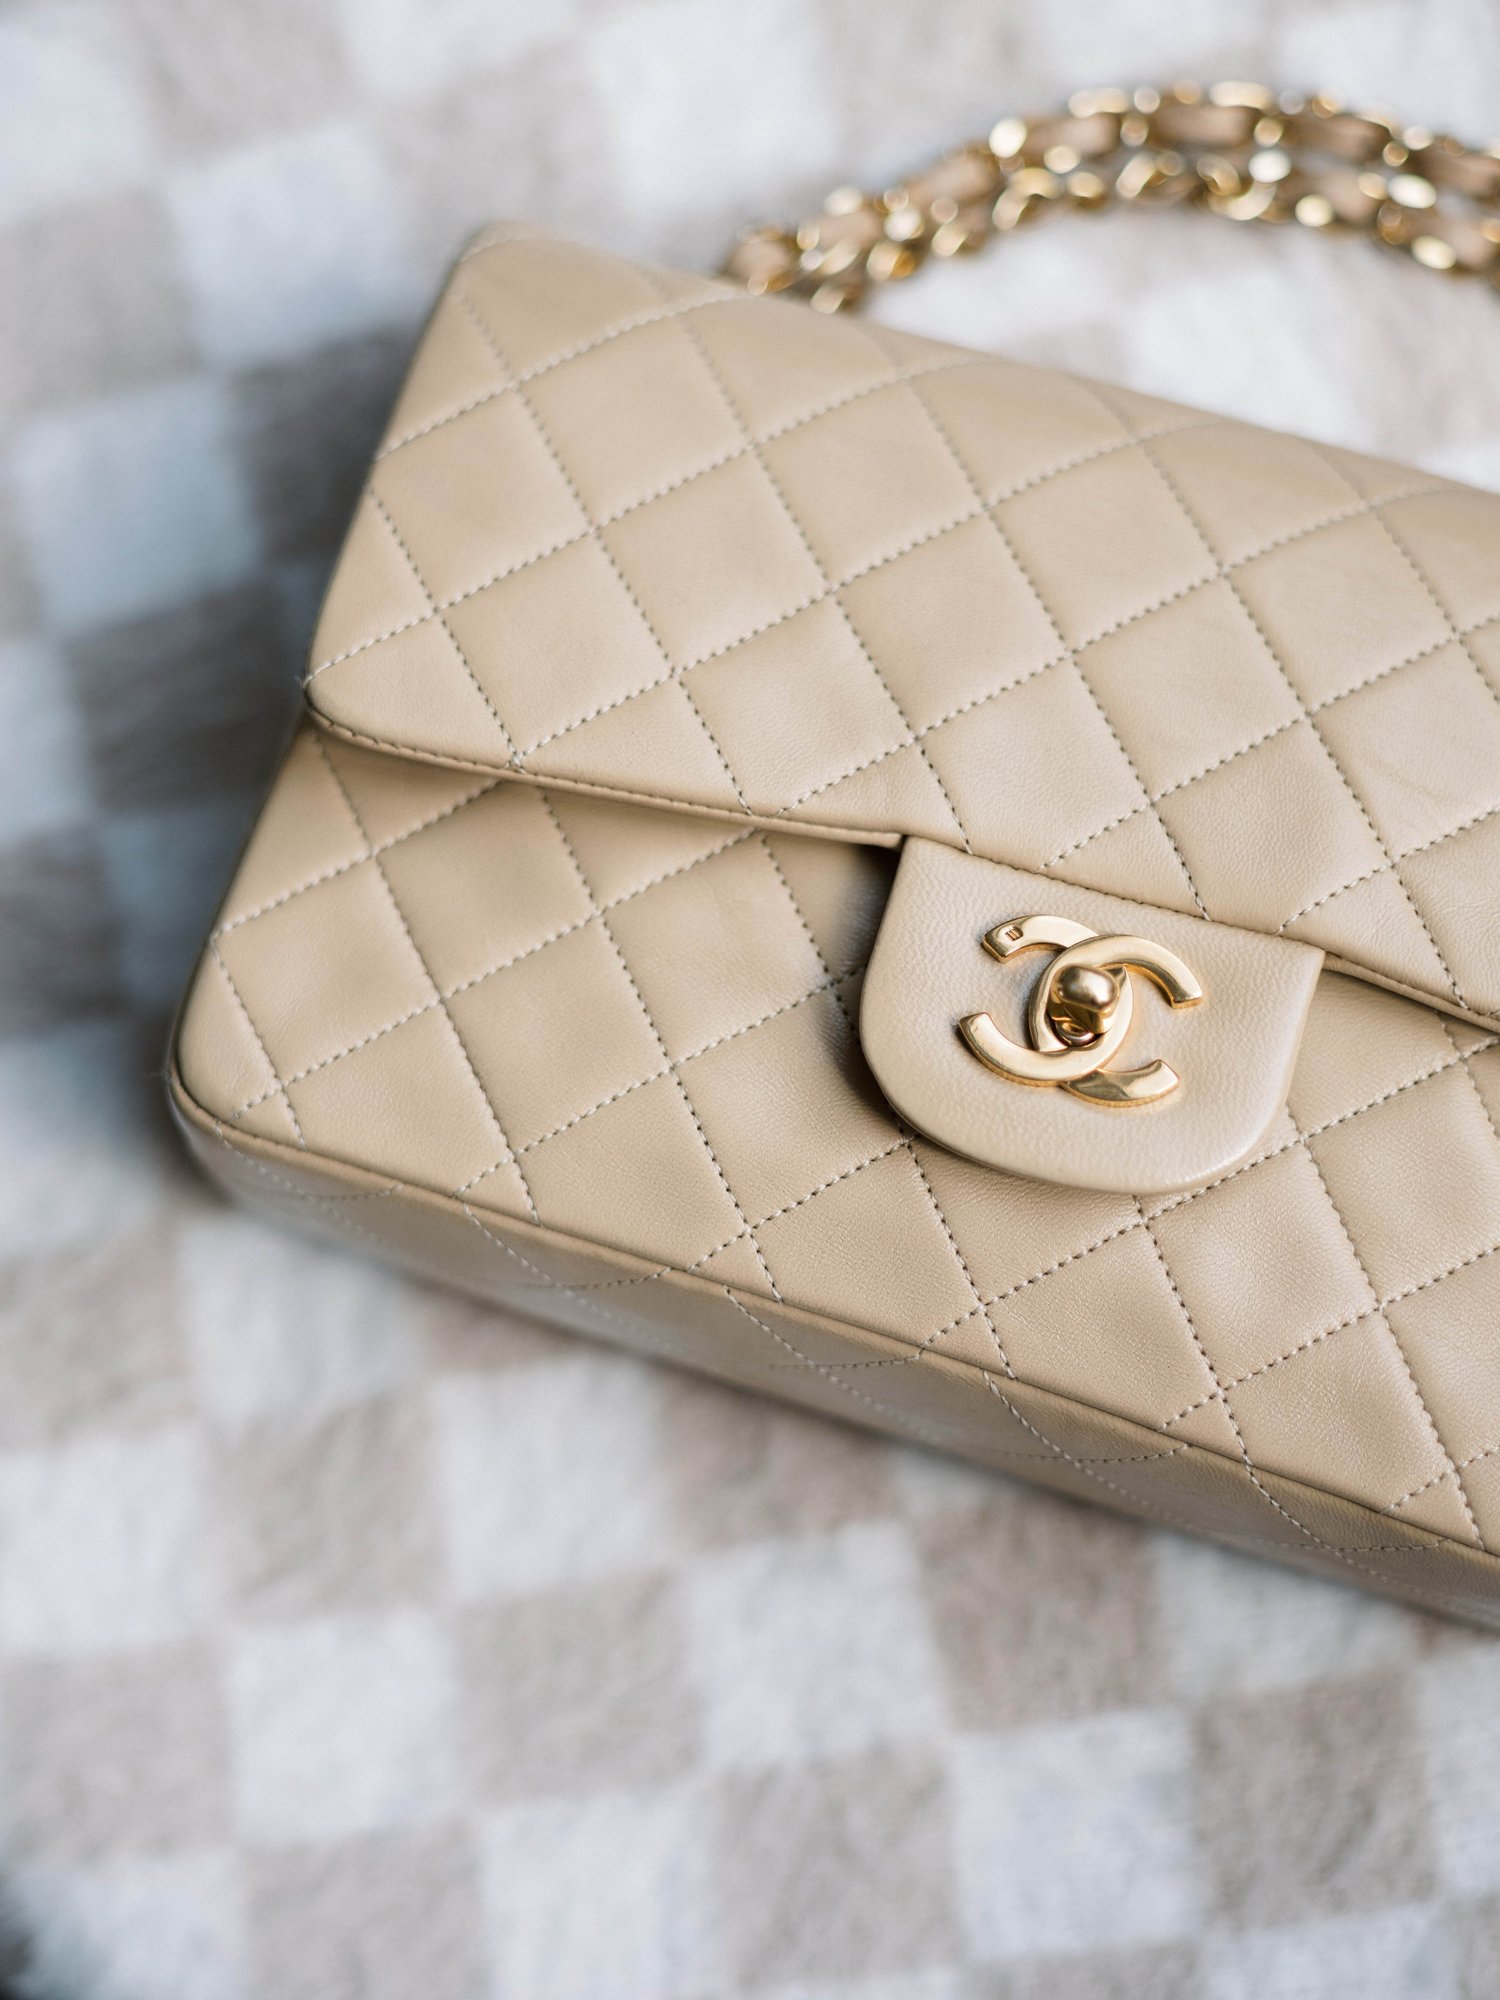 ✨❌SOLD❌Available: Vintage Chanel Small Classic Flap Beige